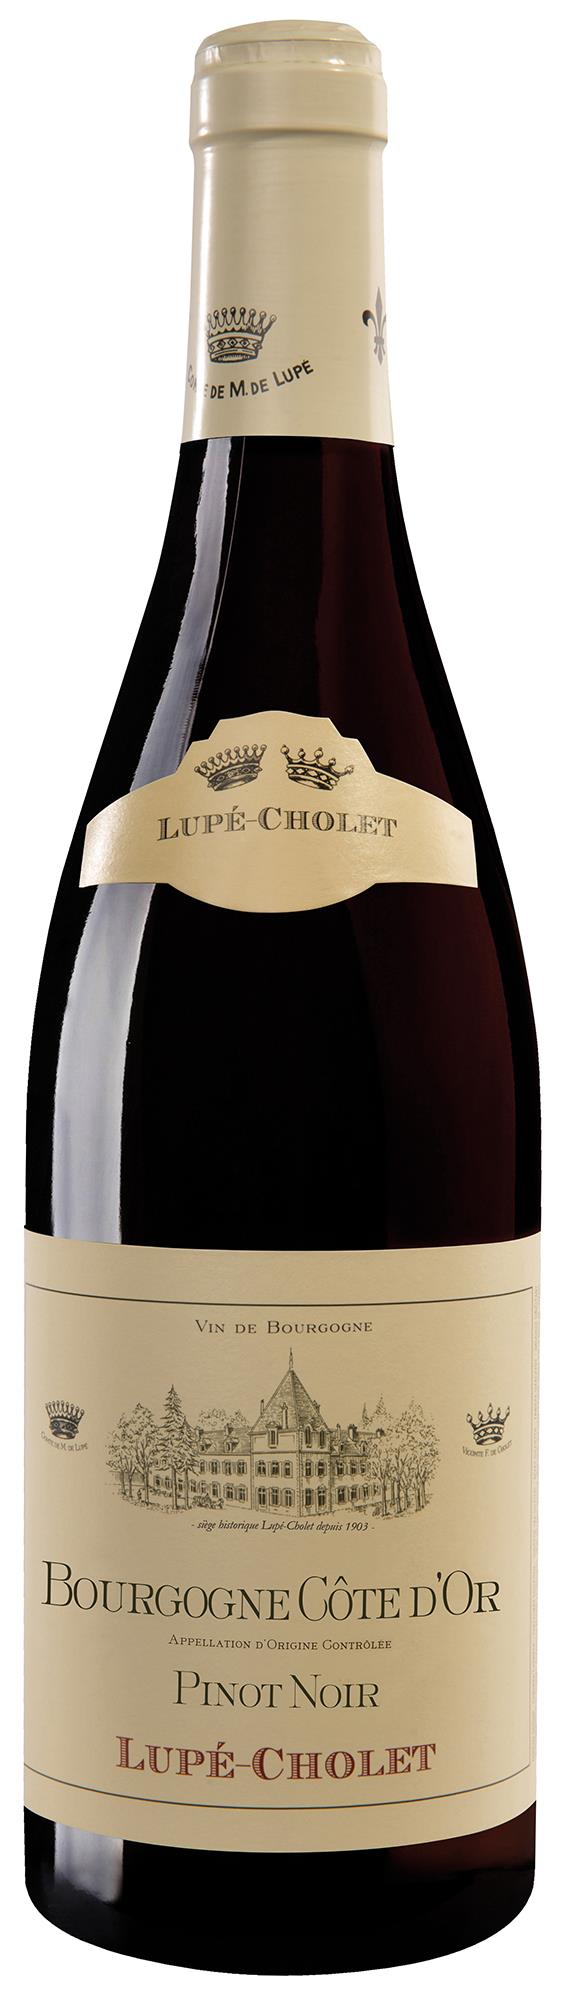 PINOT NOIR COTE D?OR Bourgogne, Lupe-Cholet 75 cl 13%